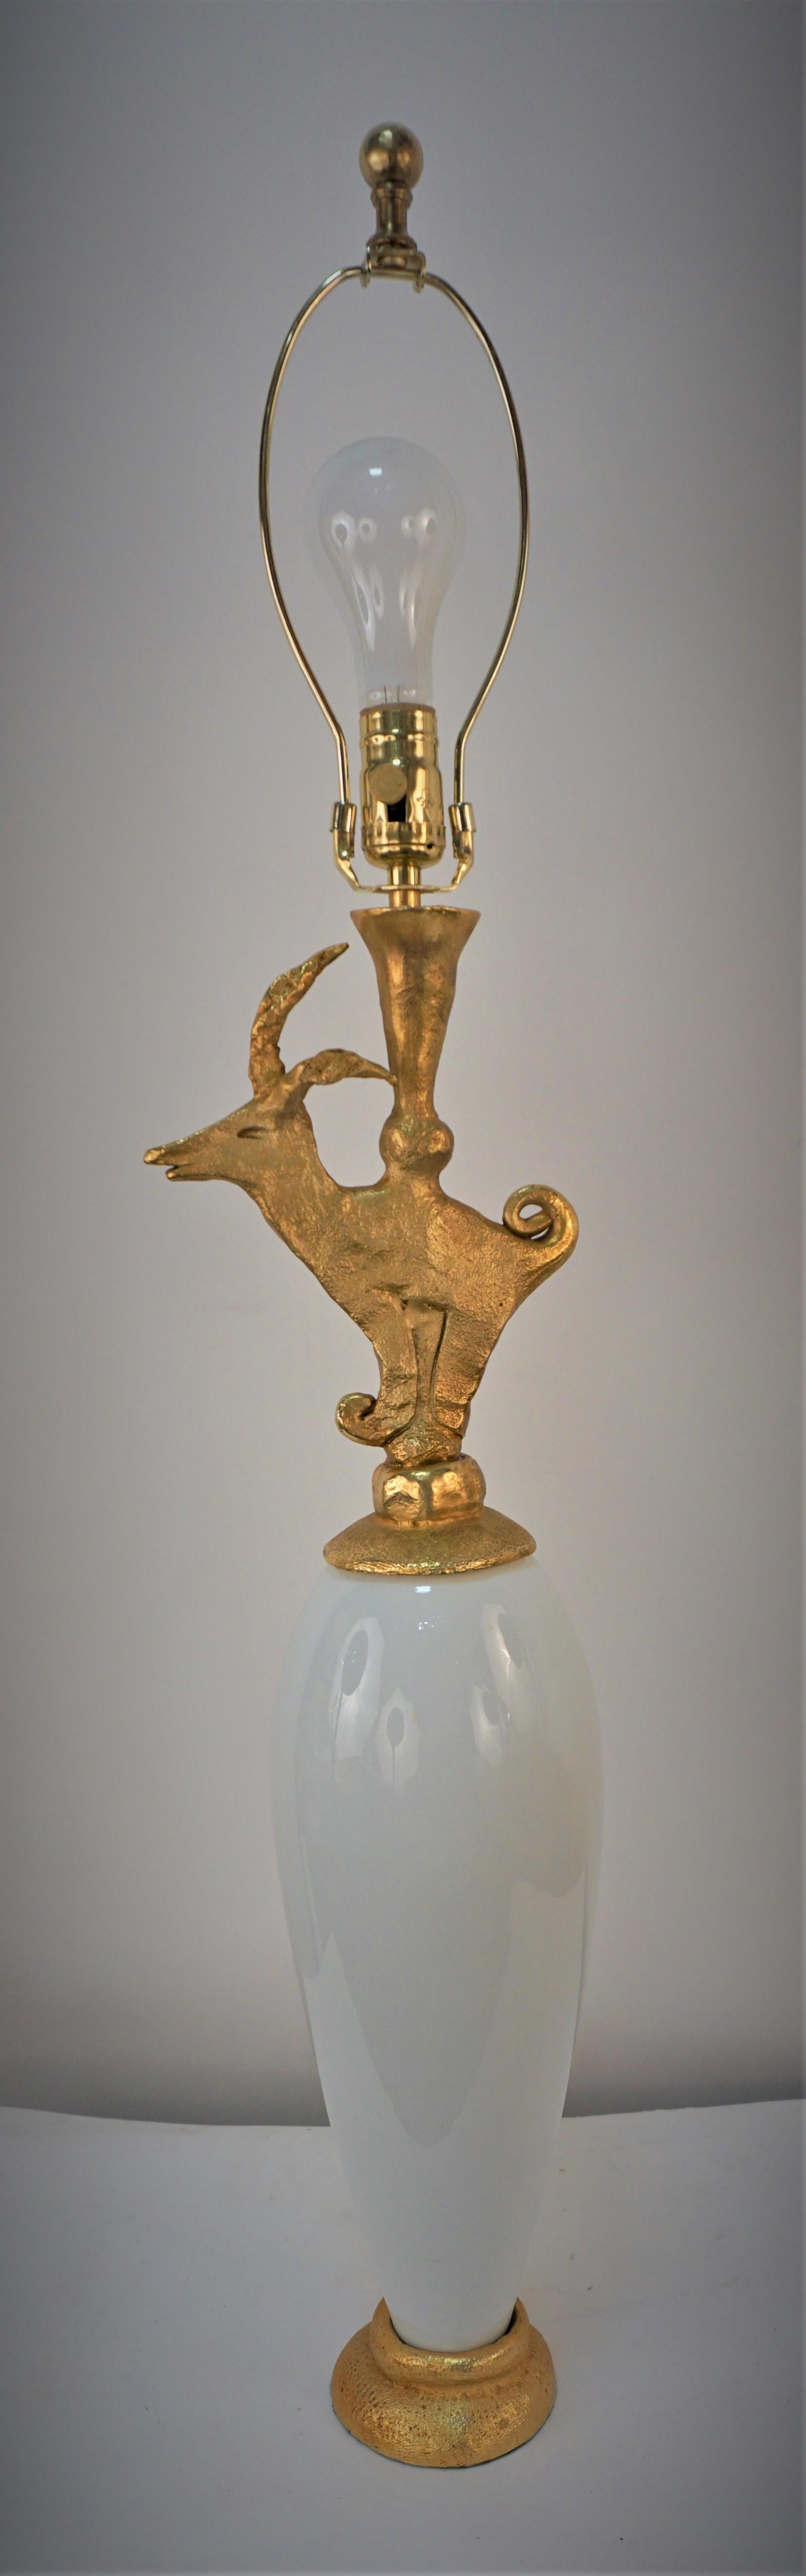 Late 20th Century Gilt Metal Ceramic Lamp by Pierre Casenove for Fondica For Sale